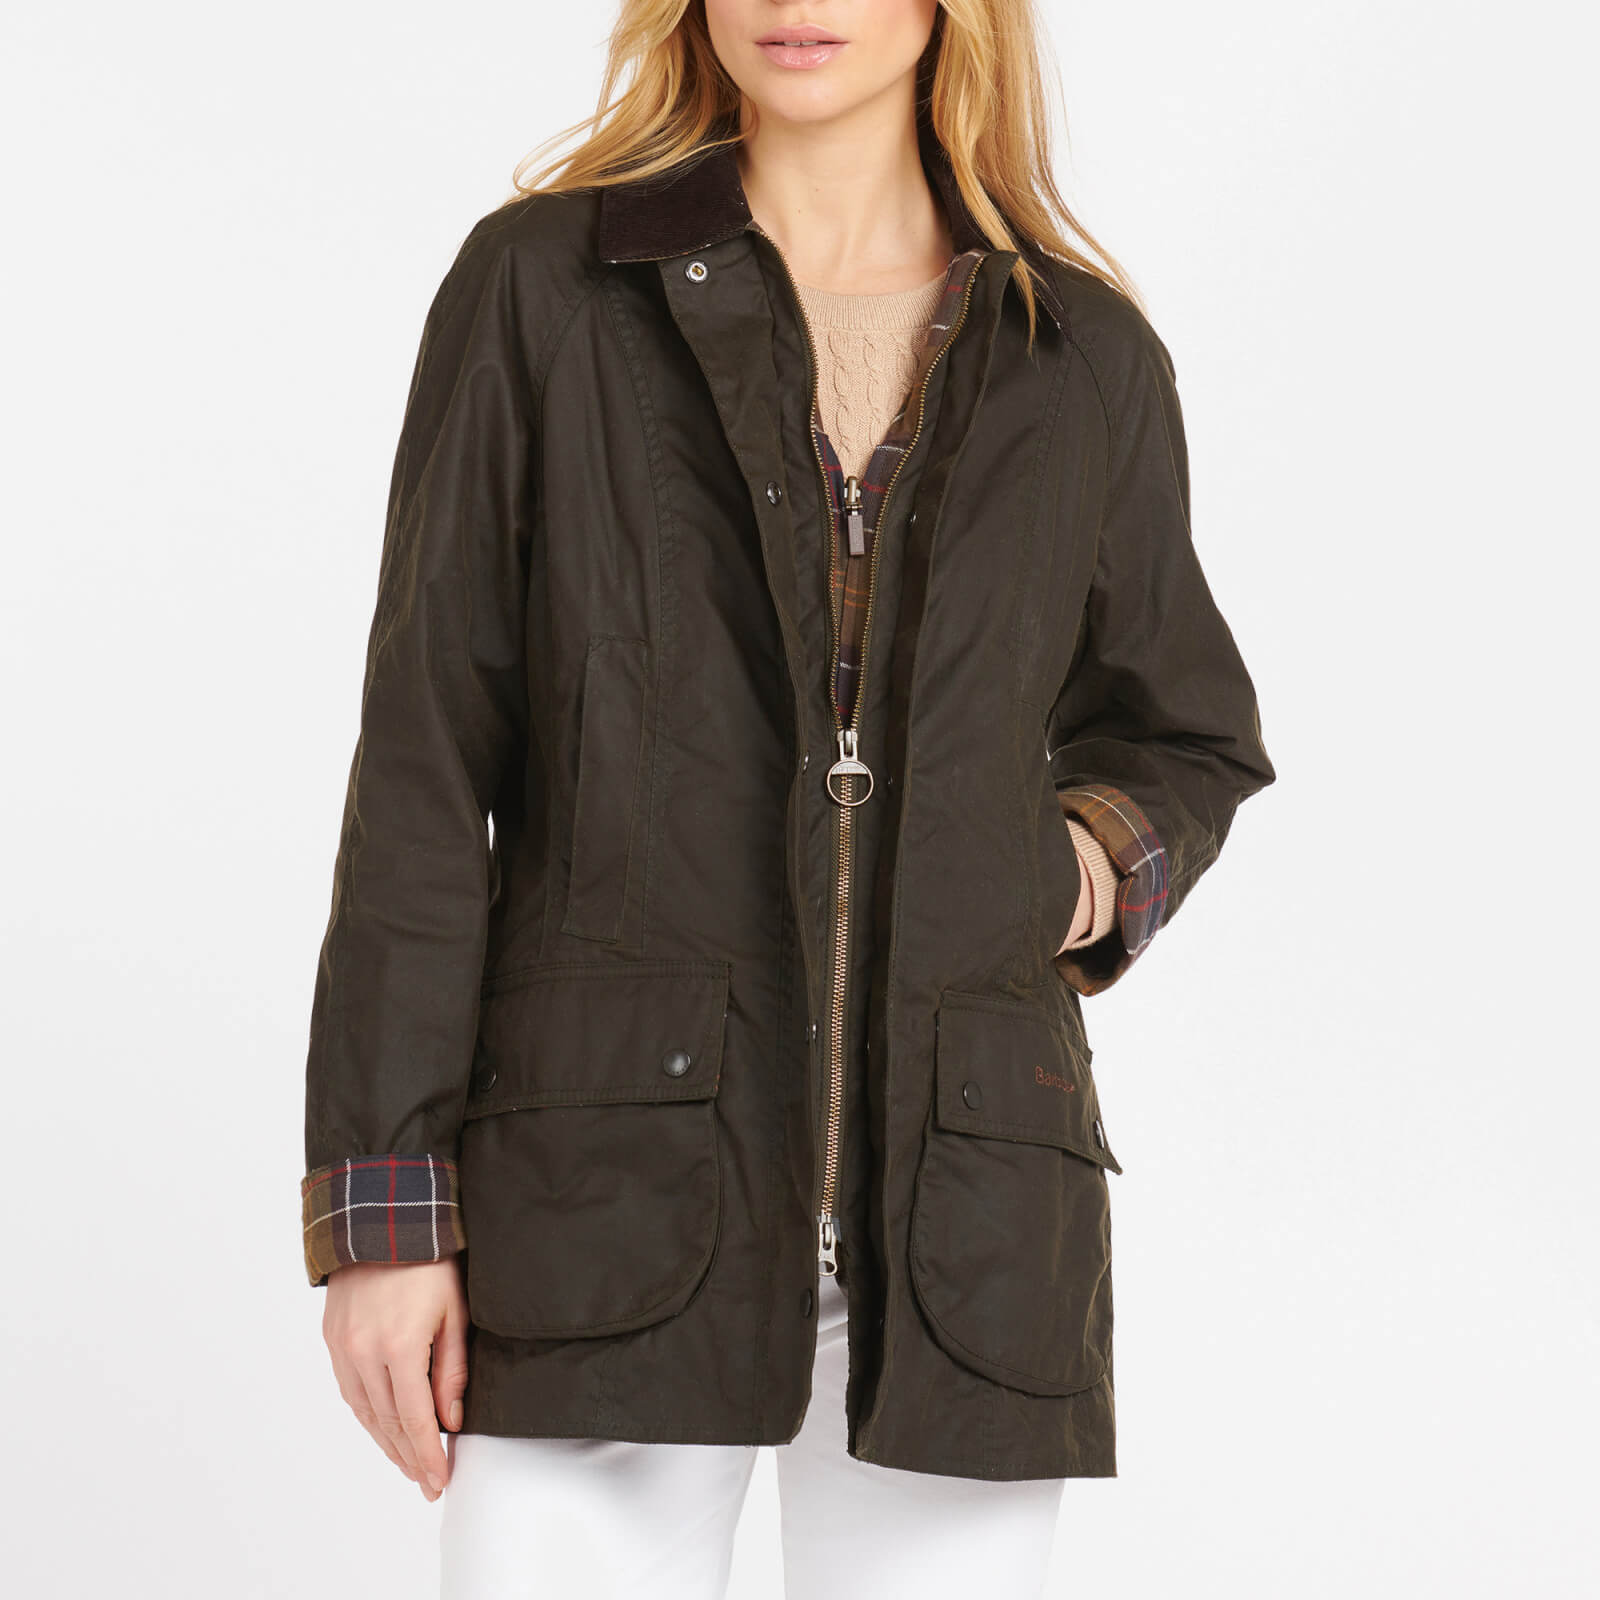 Barbour Women's Beadnell Wax Jacket - Olive - UK 14